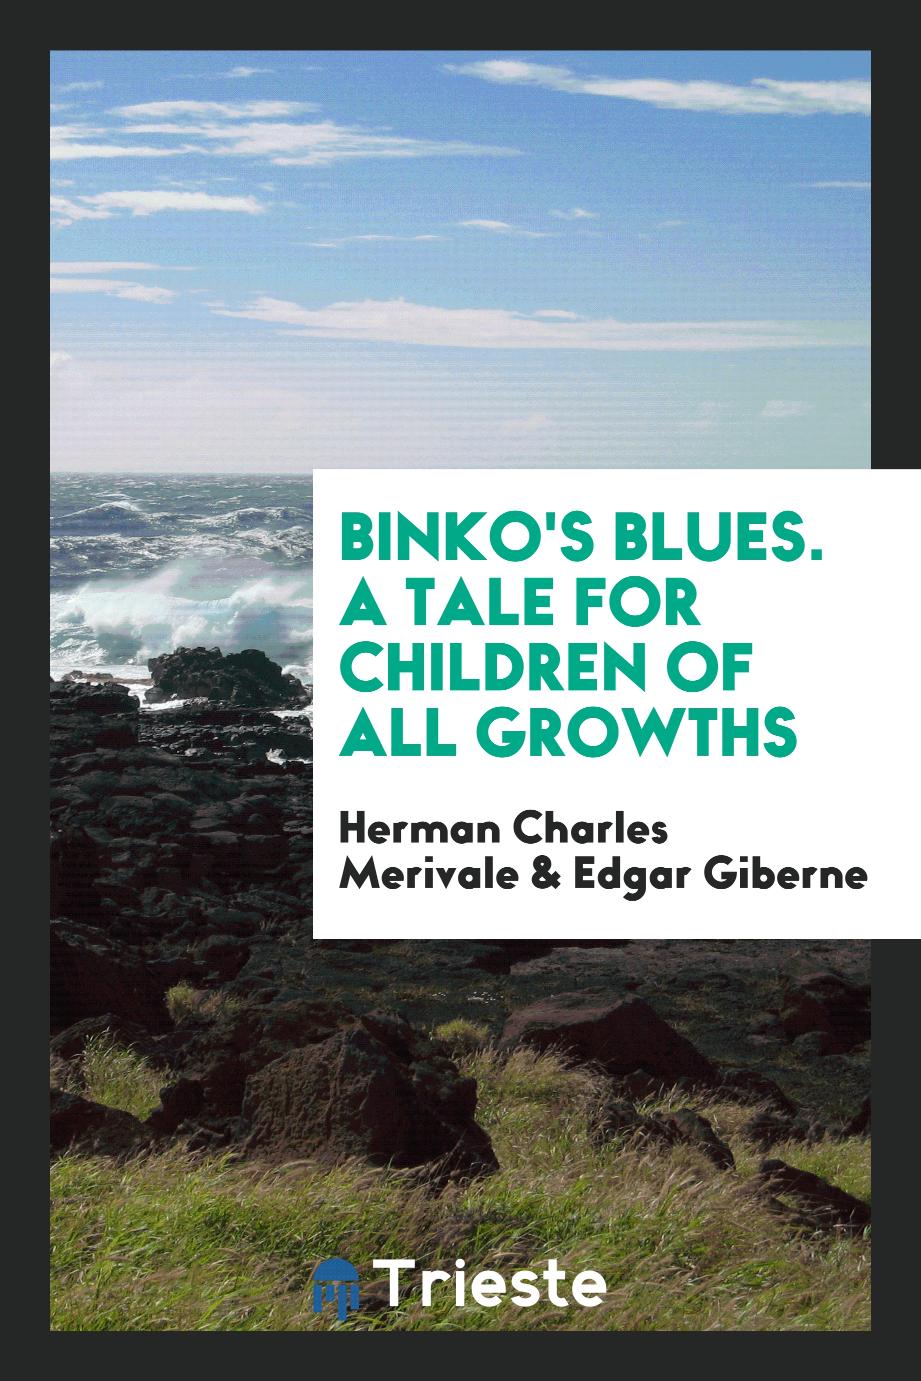 Binko's blues. A tale for children of all growths